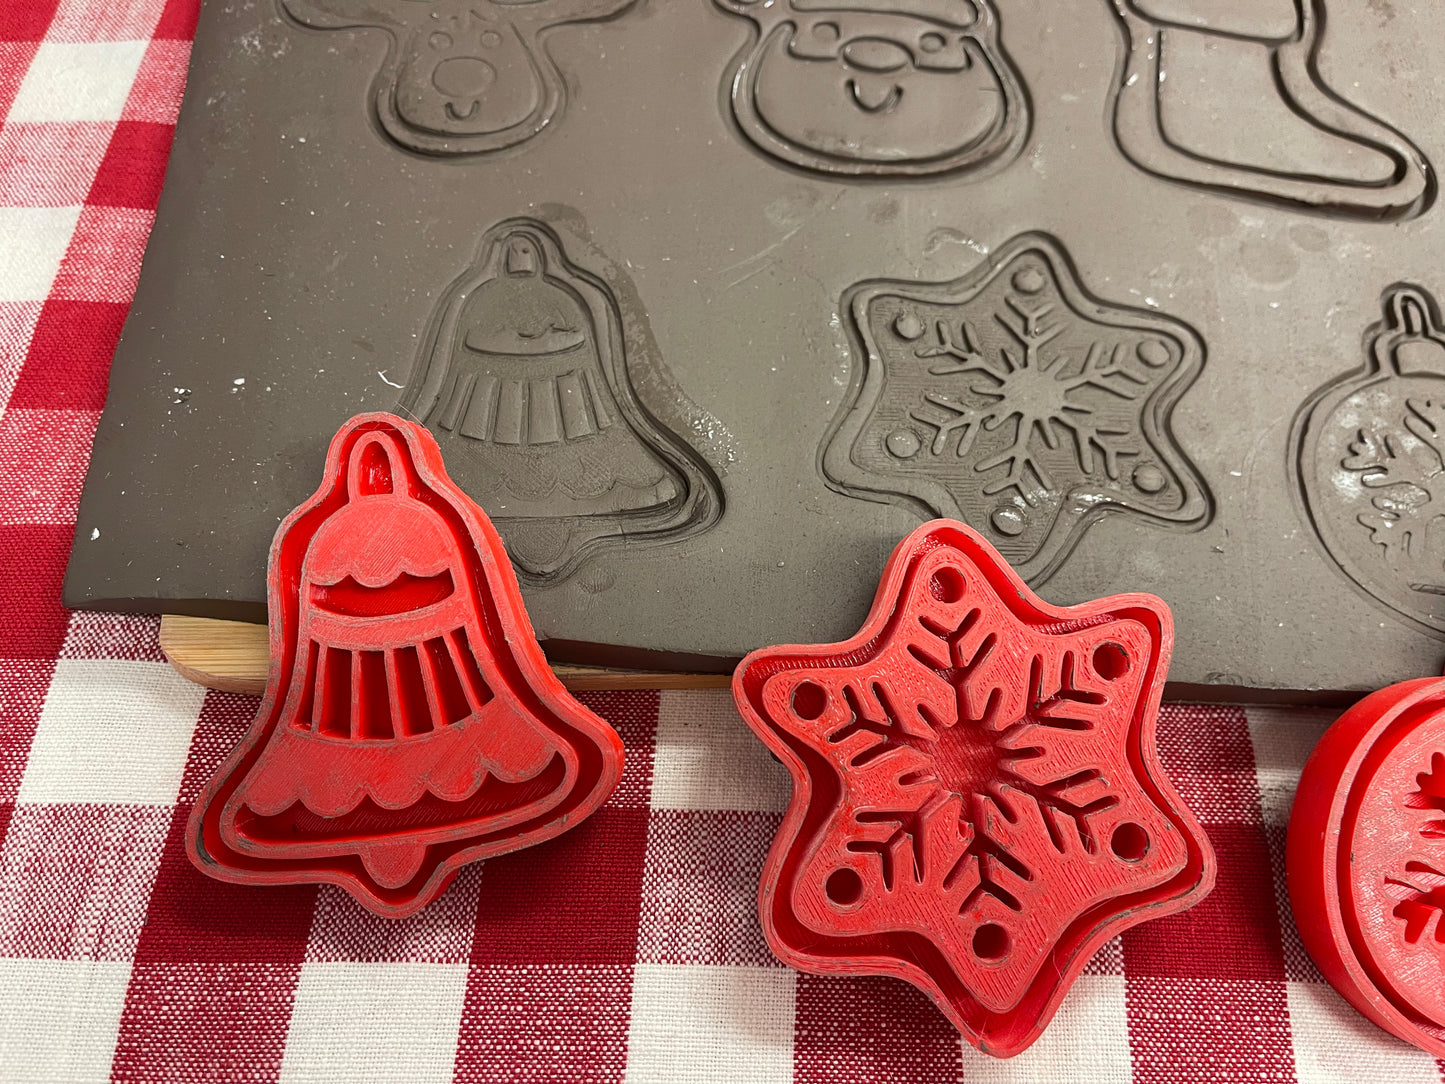 Pottery Stamp, Christmas Gingerbread Cookies various designs, with optional cookie cutter ornament - multiple sizes